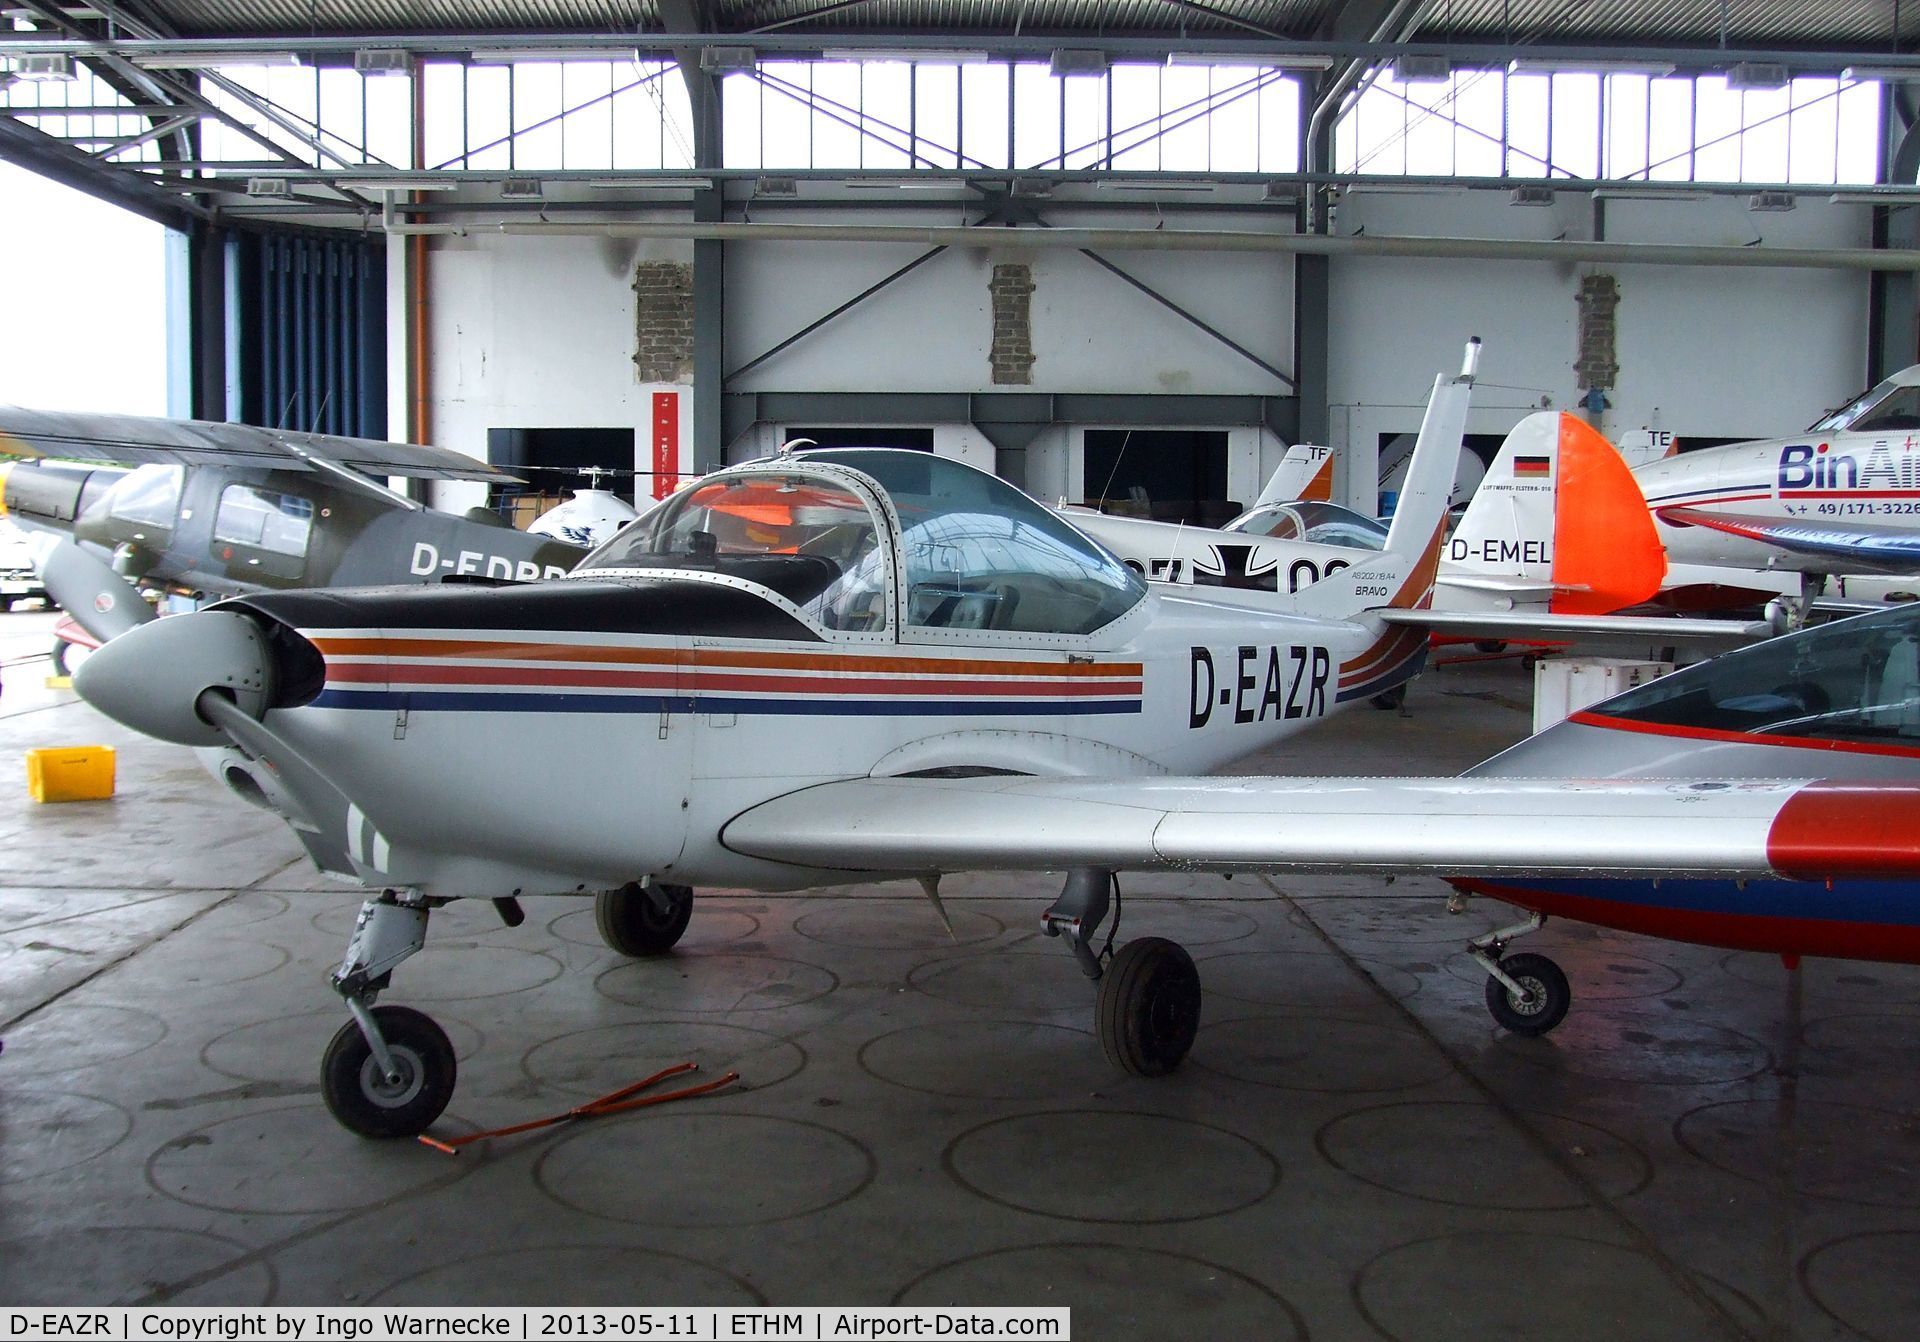 D-EAZR, 1988 FFA AS-202/18A-4 Bravo C/N 233, FFA AS-202/18A4 Bravo during an open day at the Fliegendes Museum Mendig (Flying Museum) at former German Army Aviation base, now civilian Mendig airfield